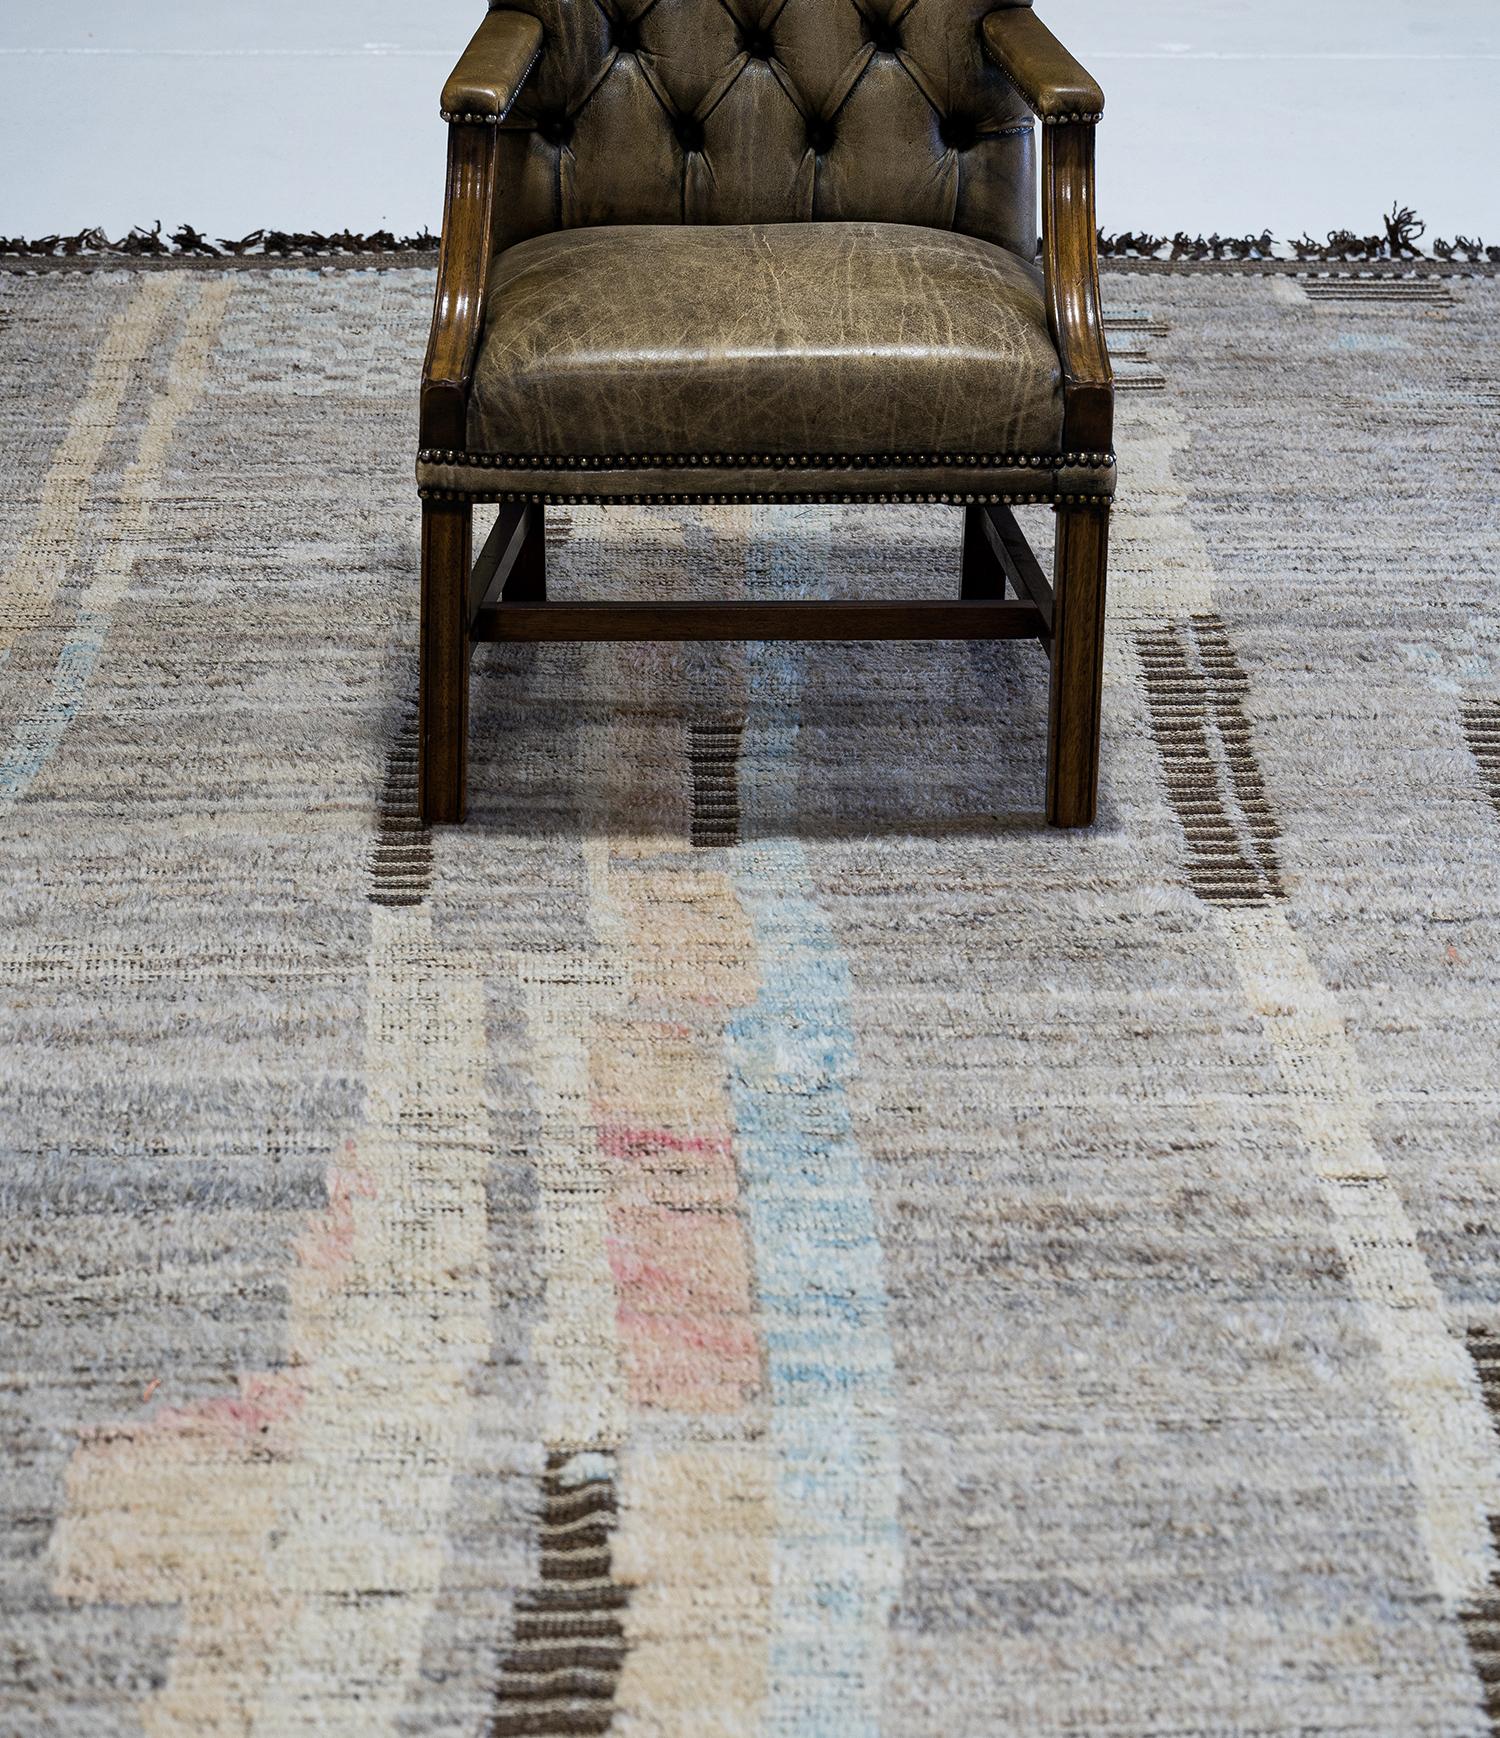 Nakhla' is a natural earth toned rug and a modern interpretation of the Moroccan world. This rugs irregular natural grey, blue, pinkish-orange, yellow, and salt and pepper strokes resembles the fibers of nature and their ability to be used for